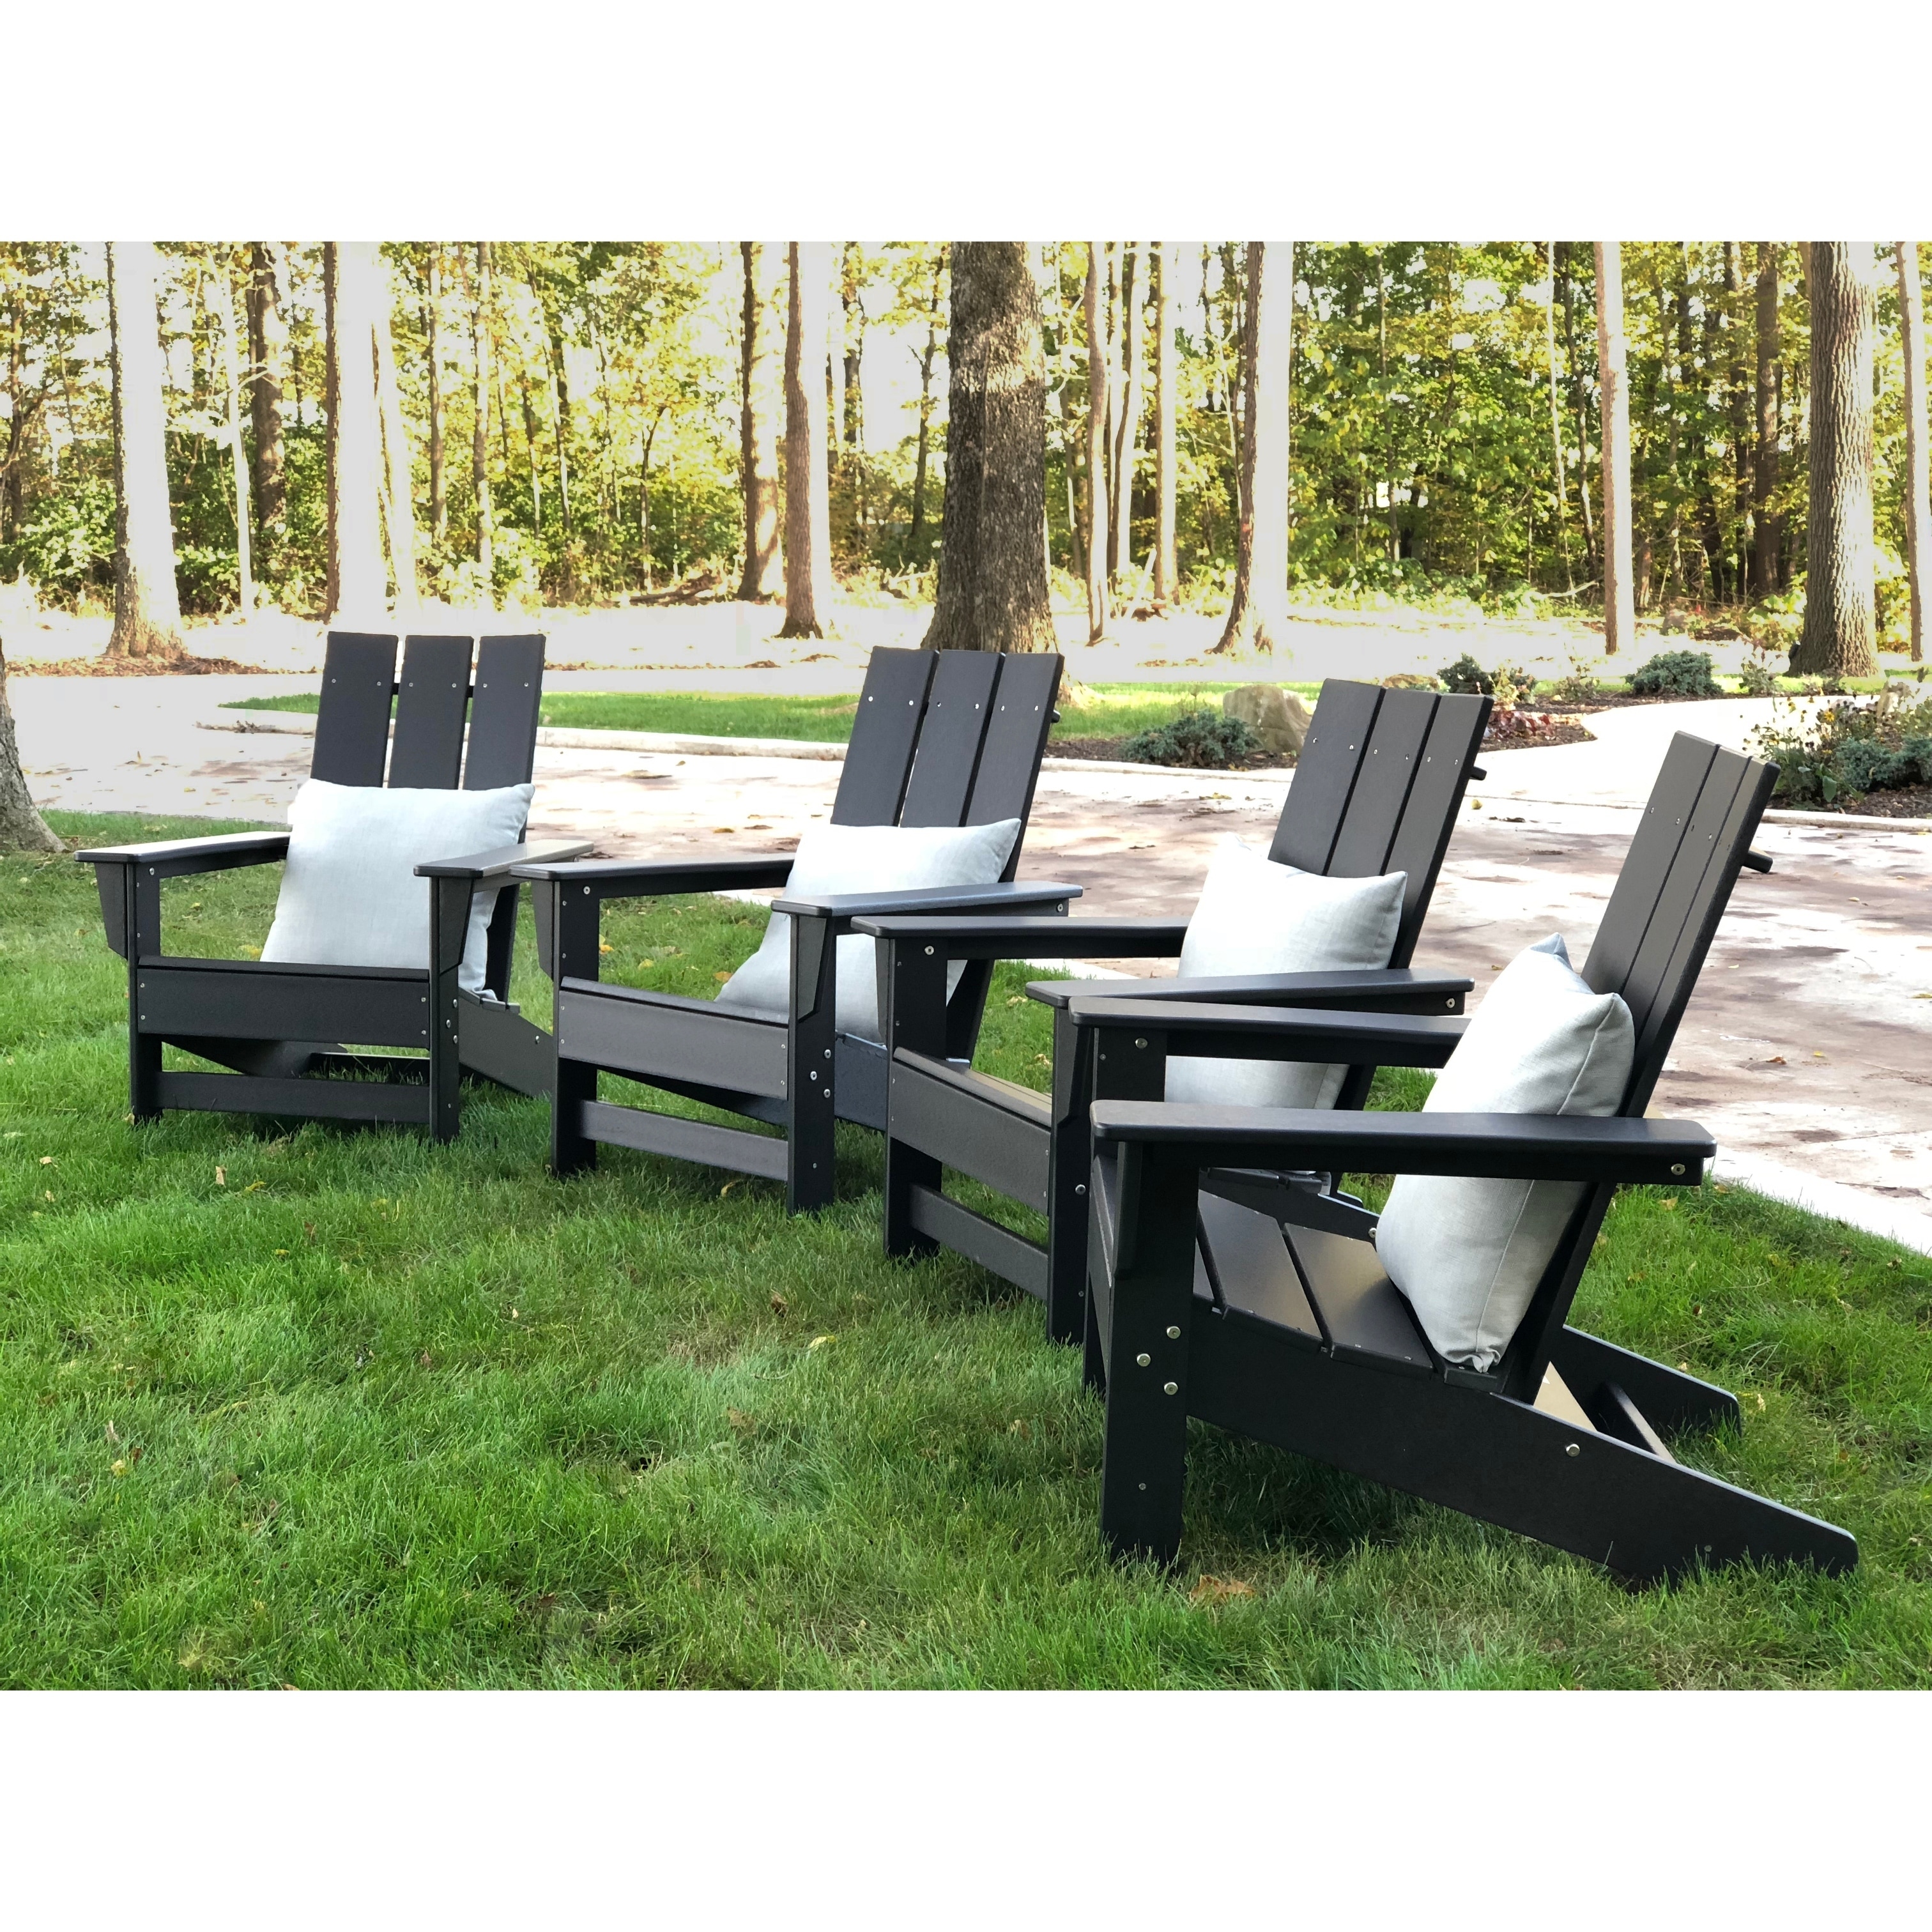 Hawkesbury Recycled Plastic Modern Adirondack Chairs Set Of 4 By